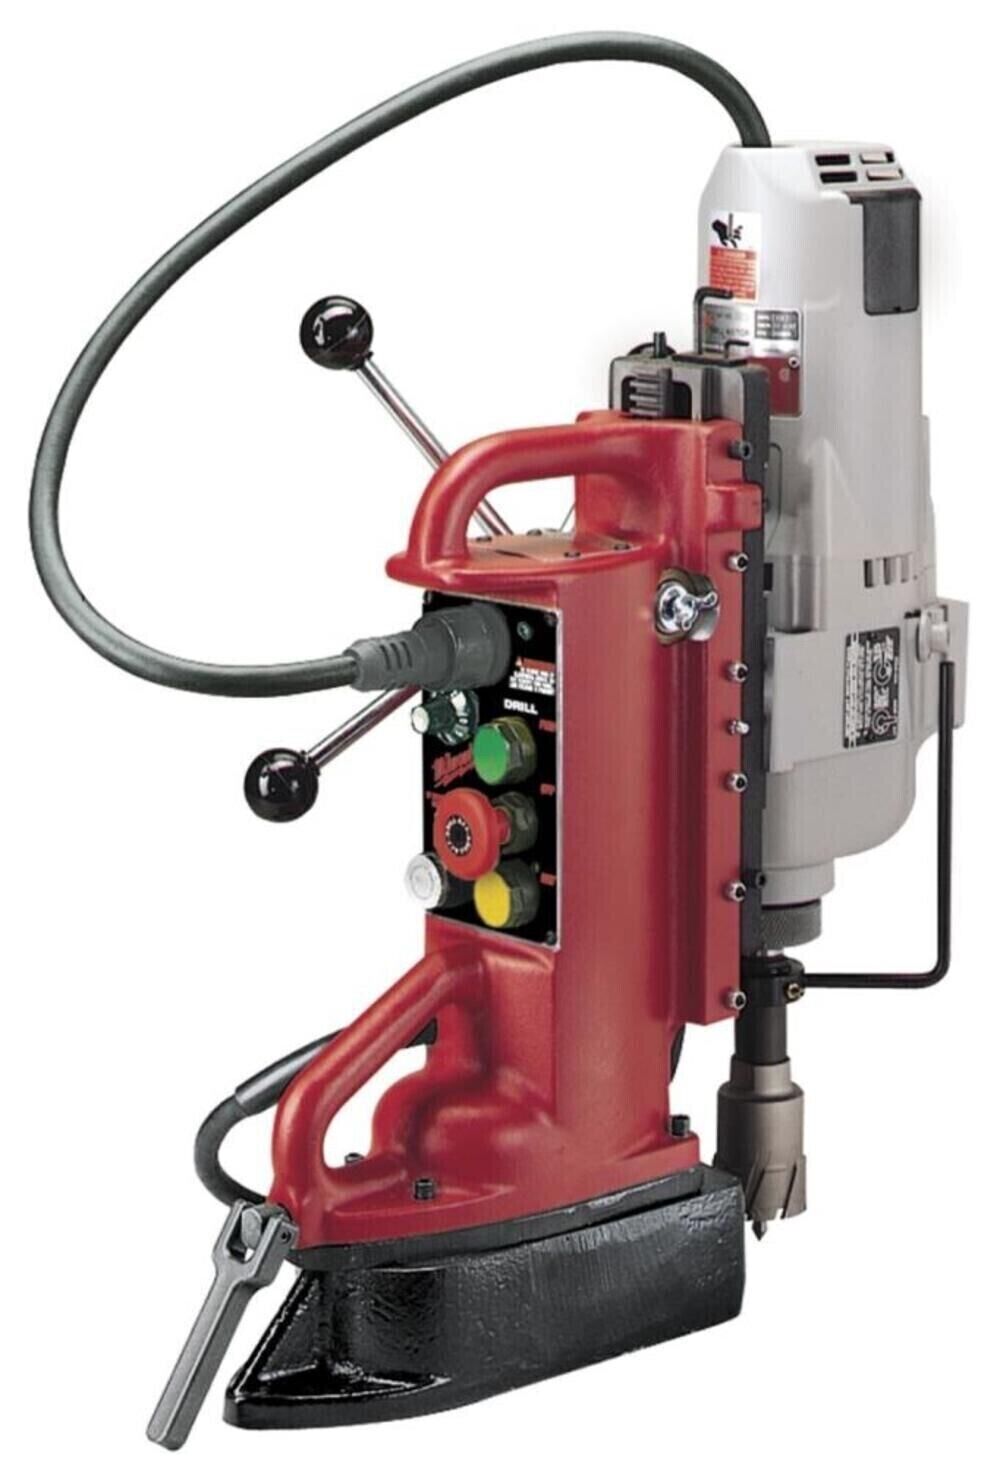 Milwaukee 4209-1 Electromagnetic Drill Press